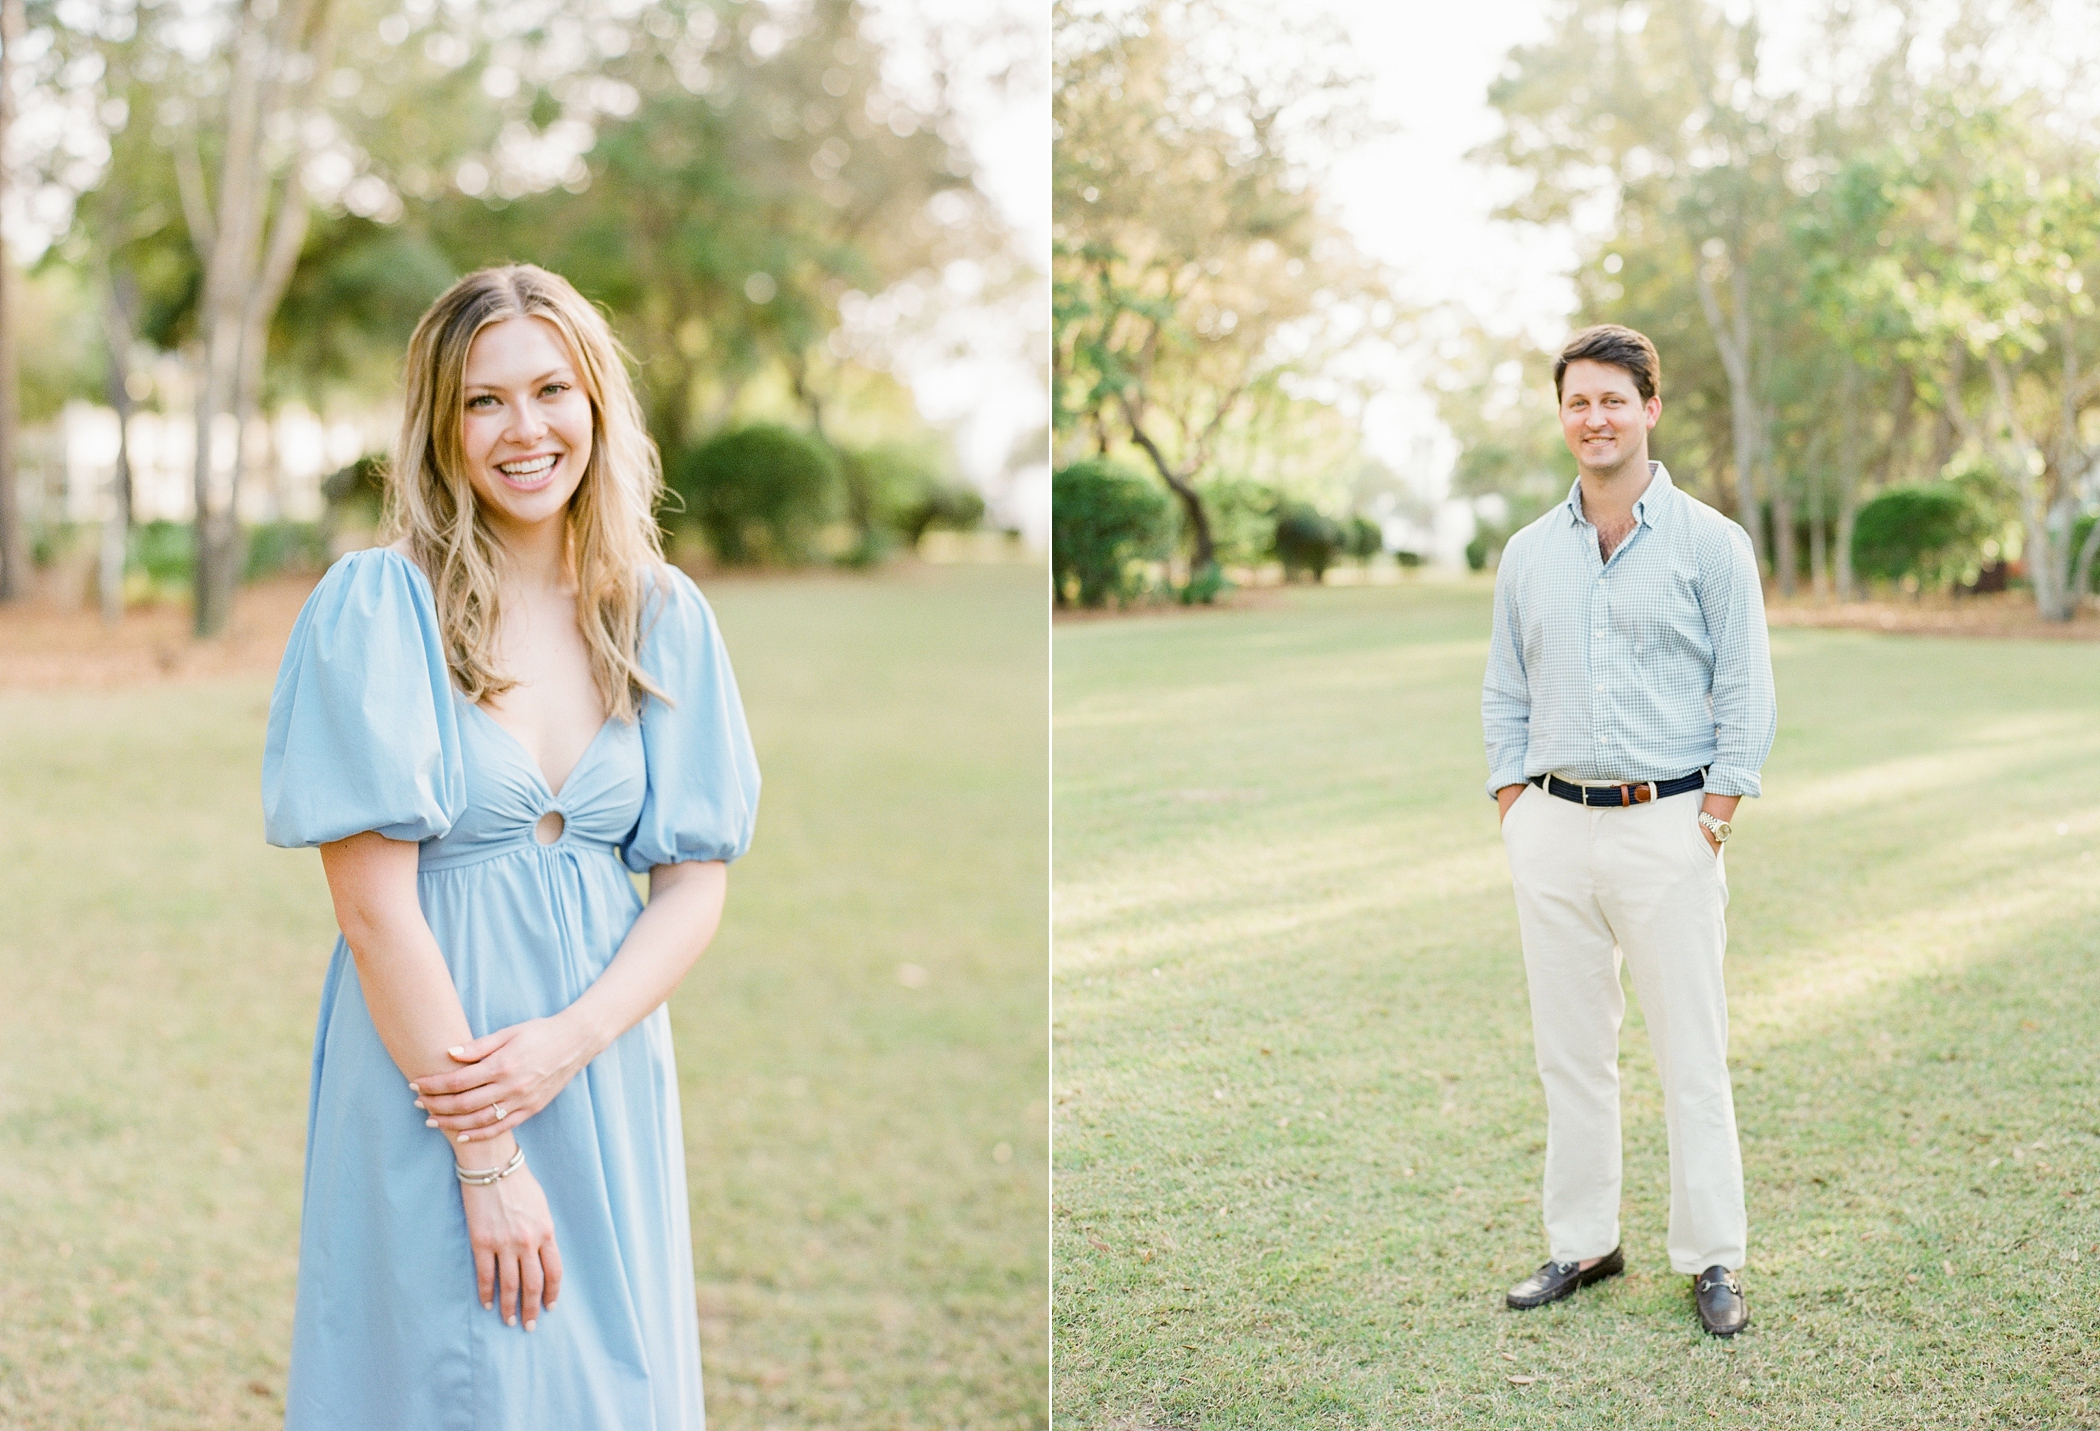 Watercolor-Florida-Engagement-Session-Jessie-Barksdale-Photography_0014.jpg